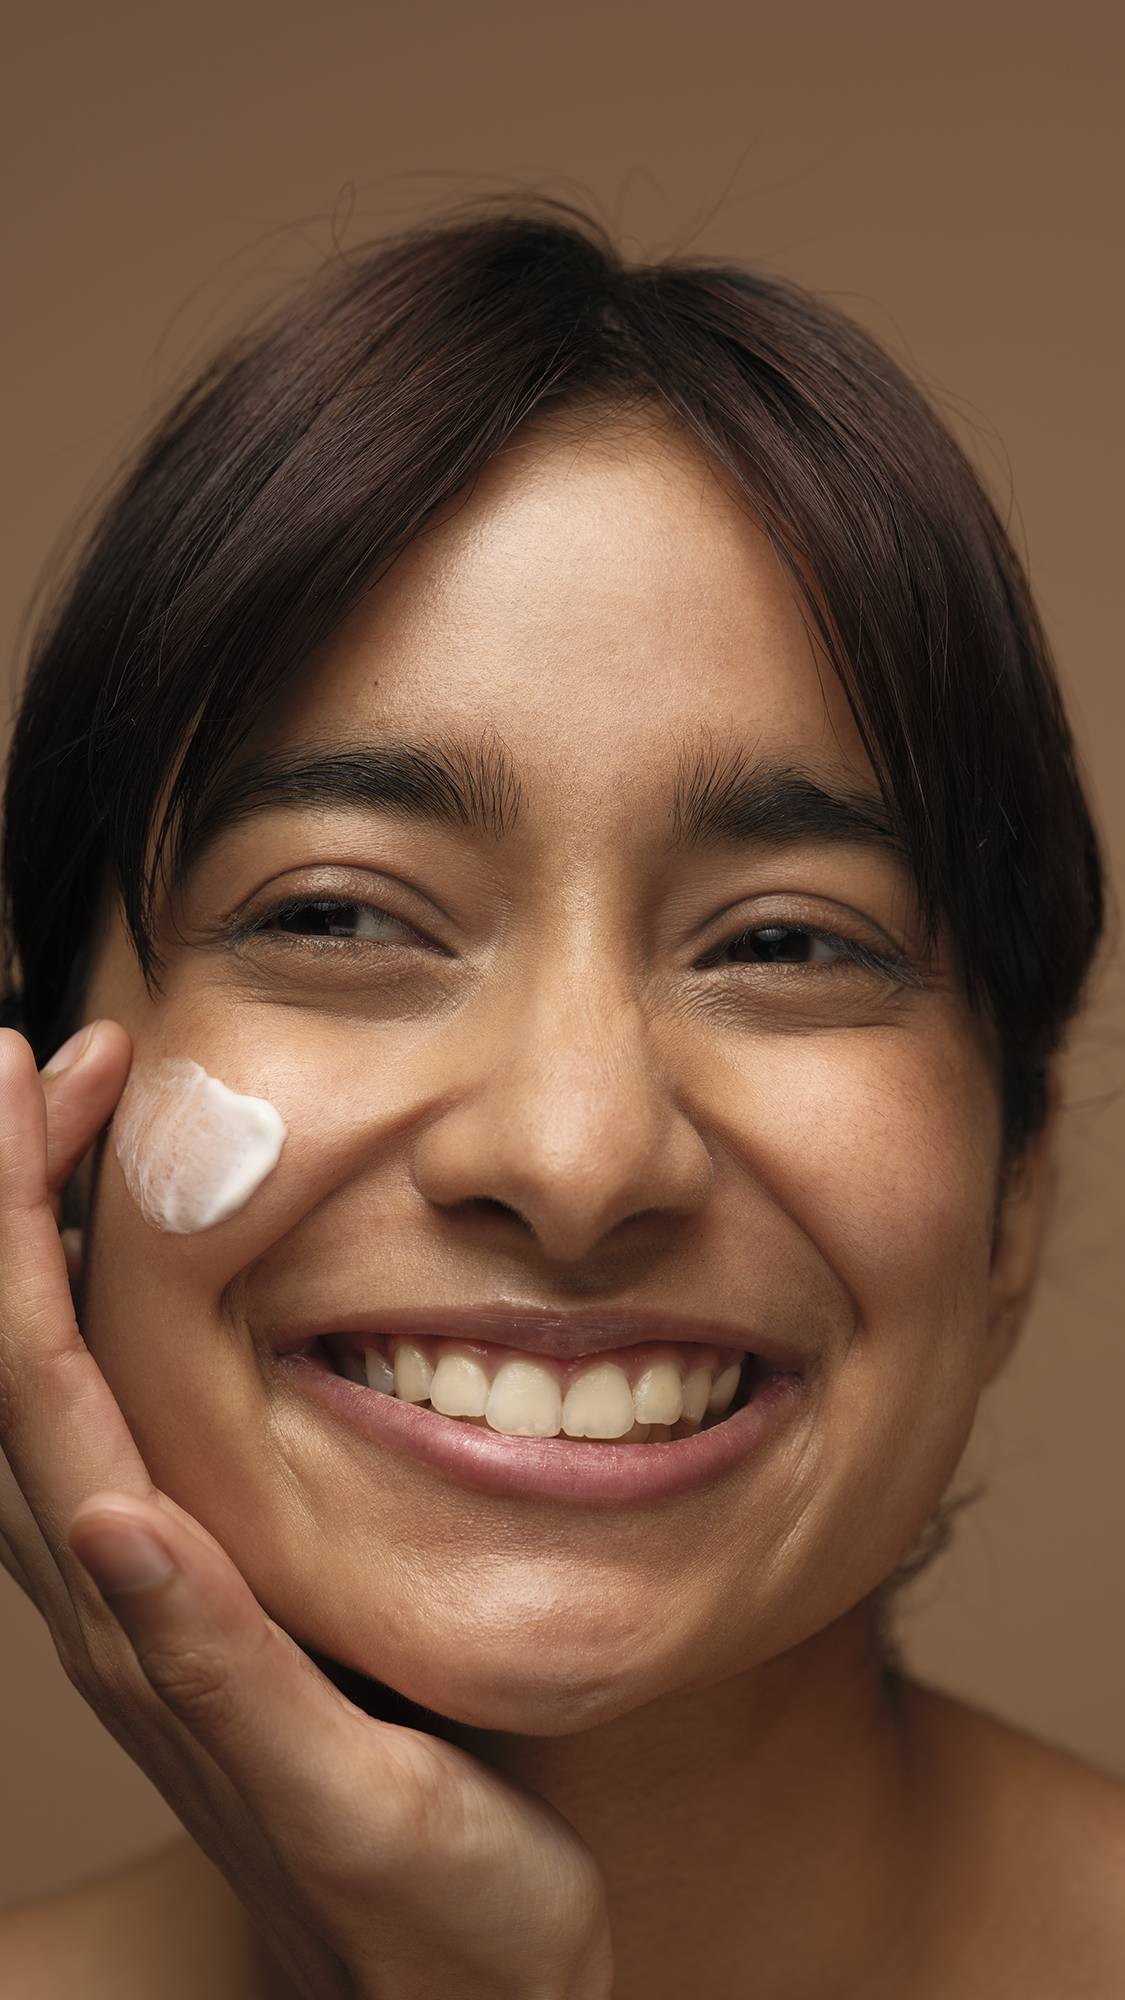 A close-up image of the model's smiling face as they start to apply the Celestial self-preserving moisturiser to one cheek. They are on a warm, earthy-brown background. 